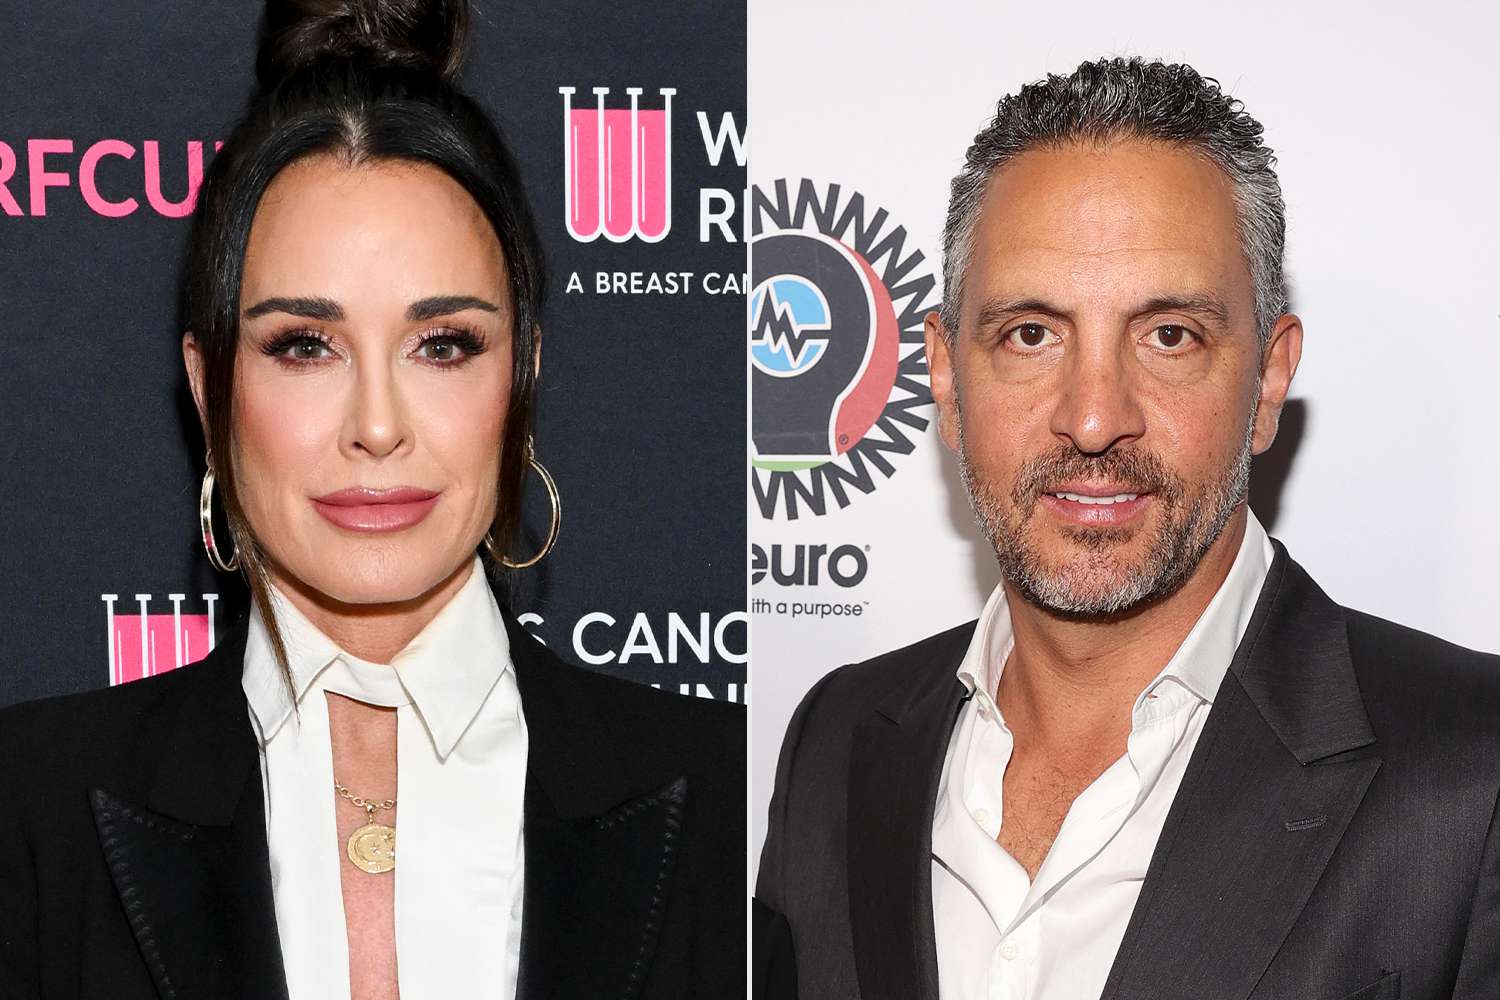 Kyle Richards Confirms Return to “RHOBH”, Says She's 'Sure' Estranged Husband Mauricio Umansky Will Appear as 'He’s Obviously Family'